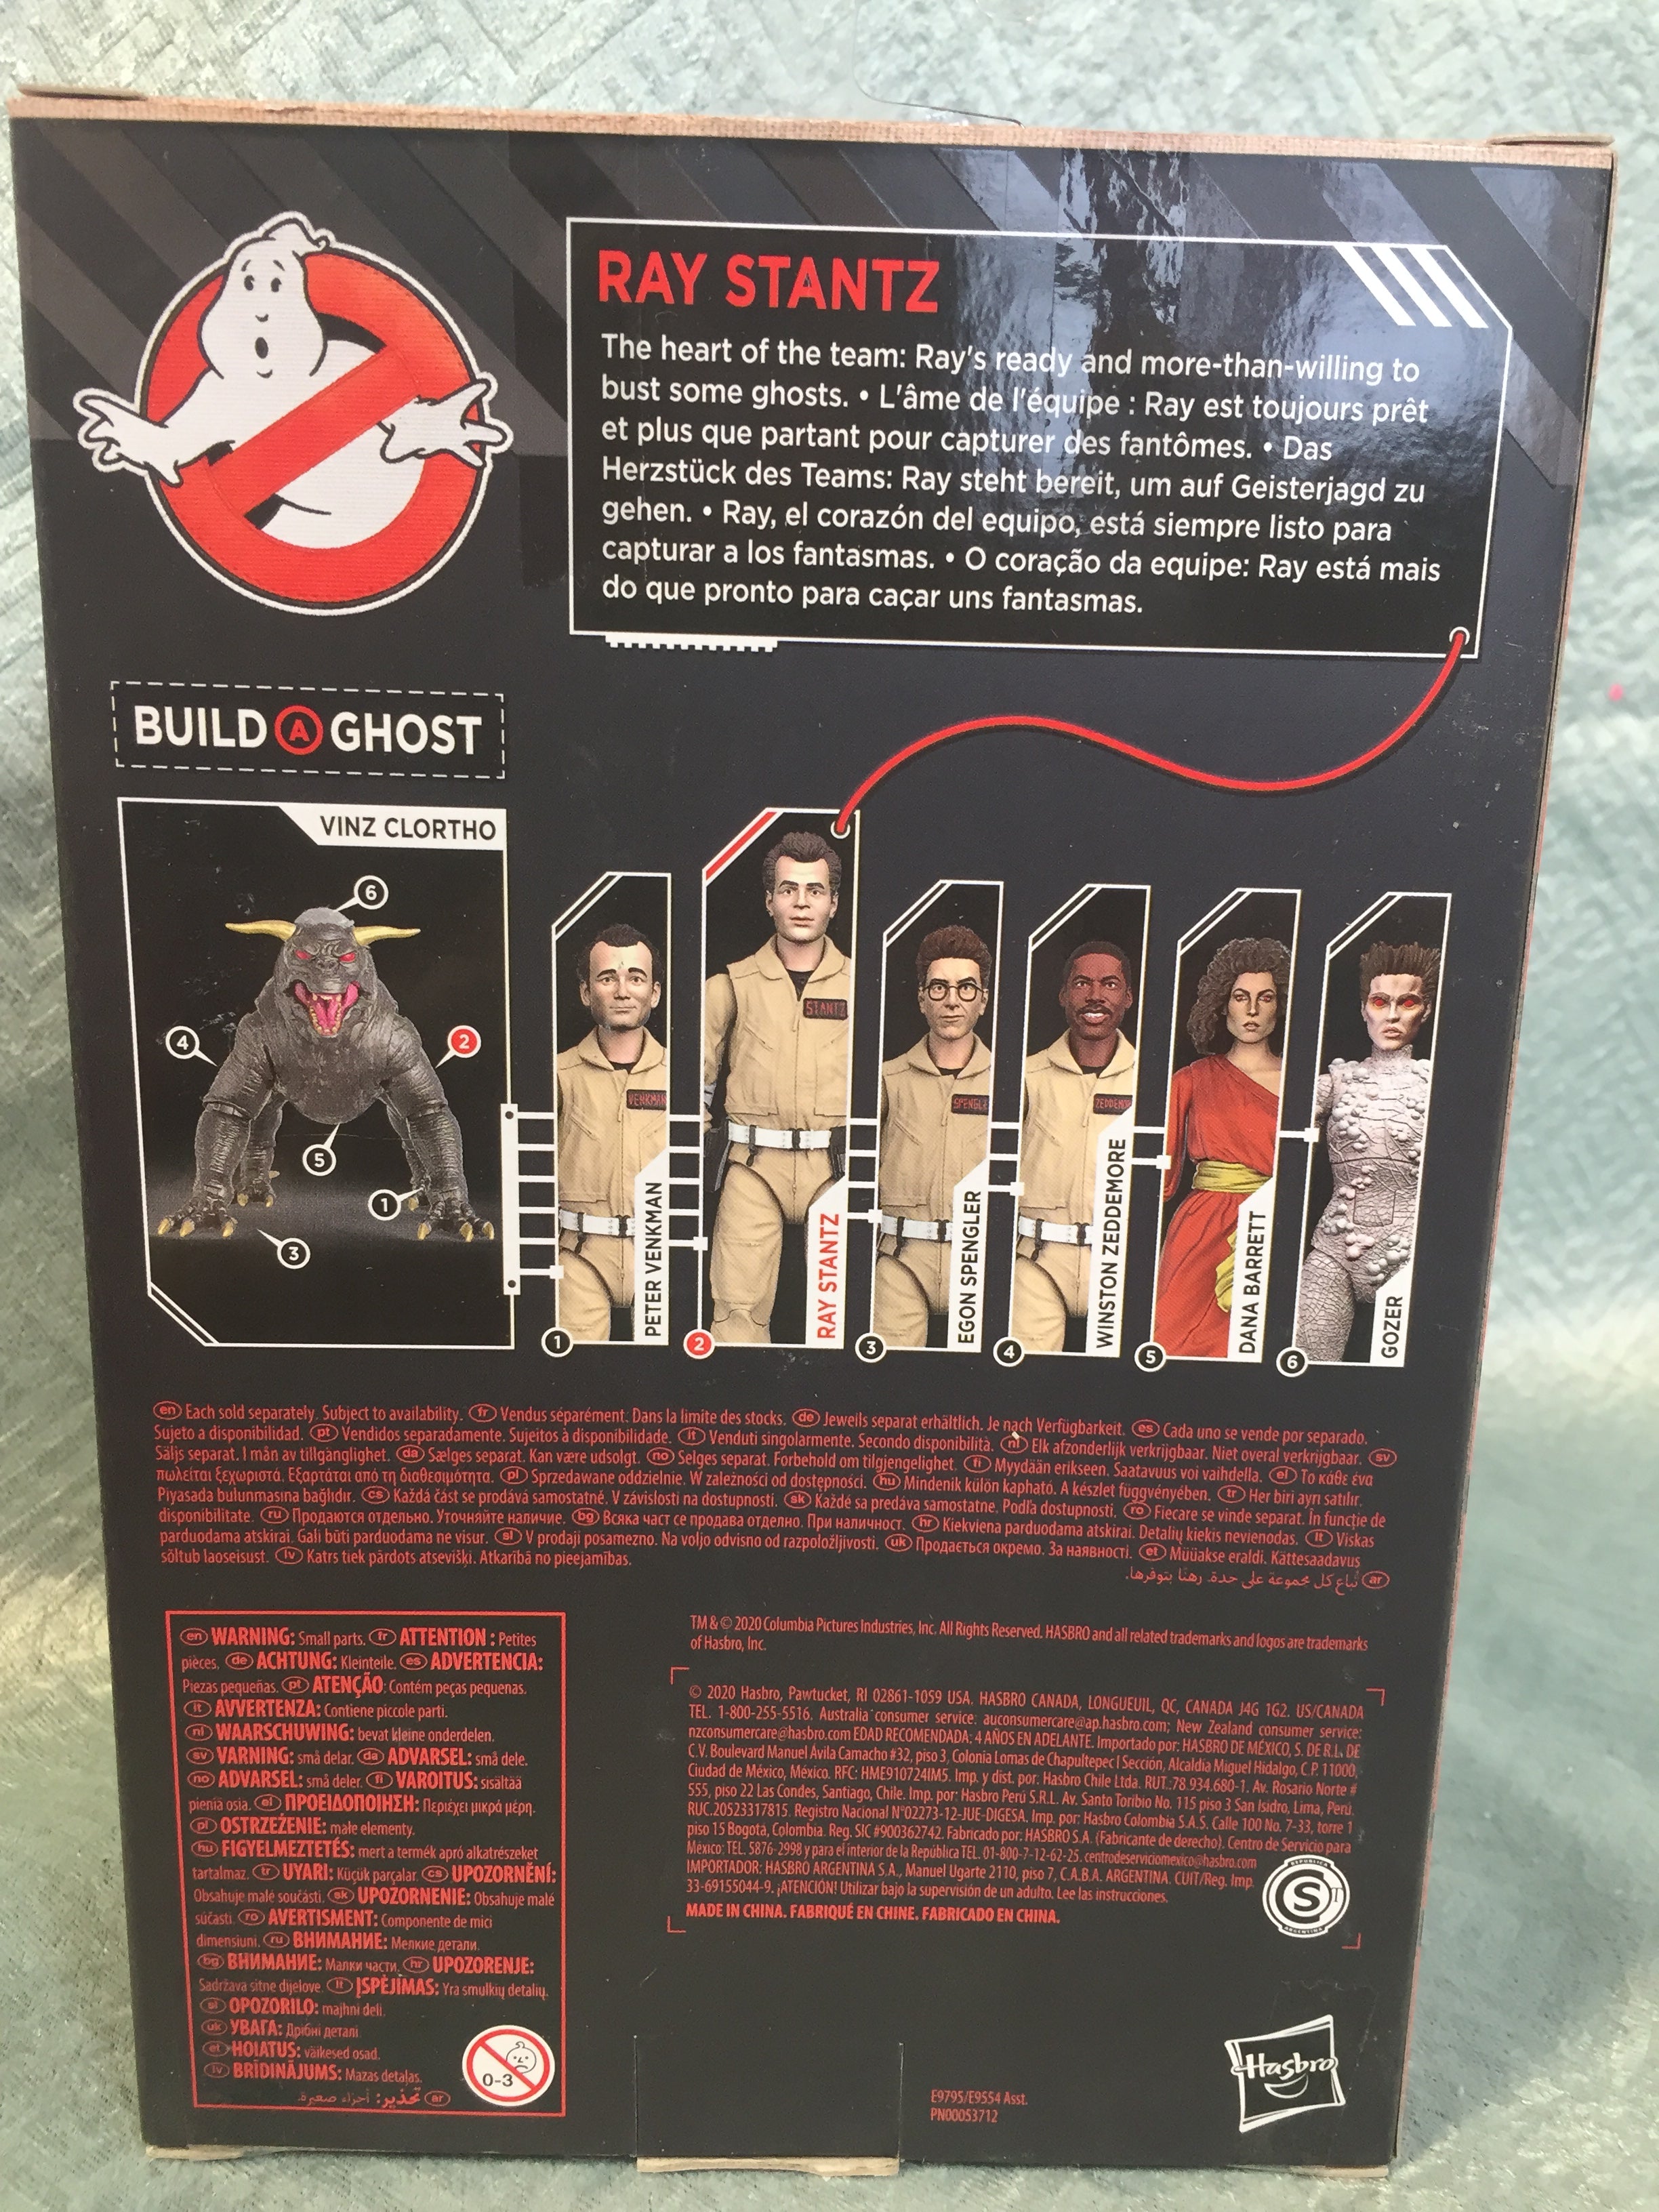 Ghostbusters Ray Stantz Toy 6-Inch-Scale Collectible Classic 1984 Ghostbusters Action Figure (7619748069614)